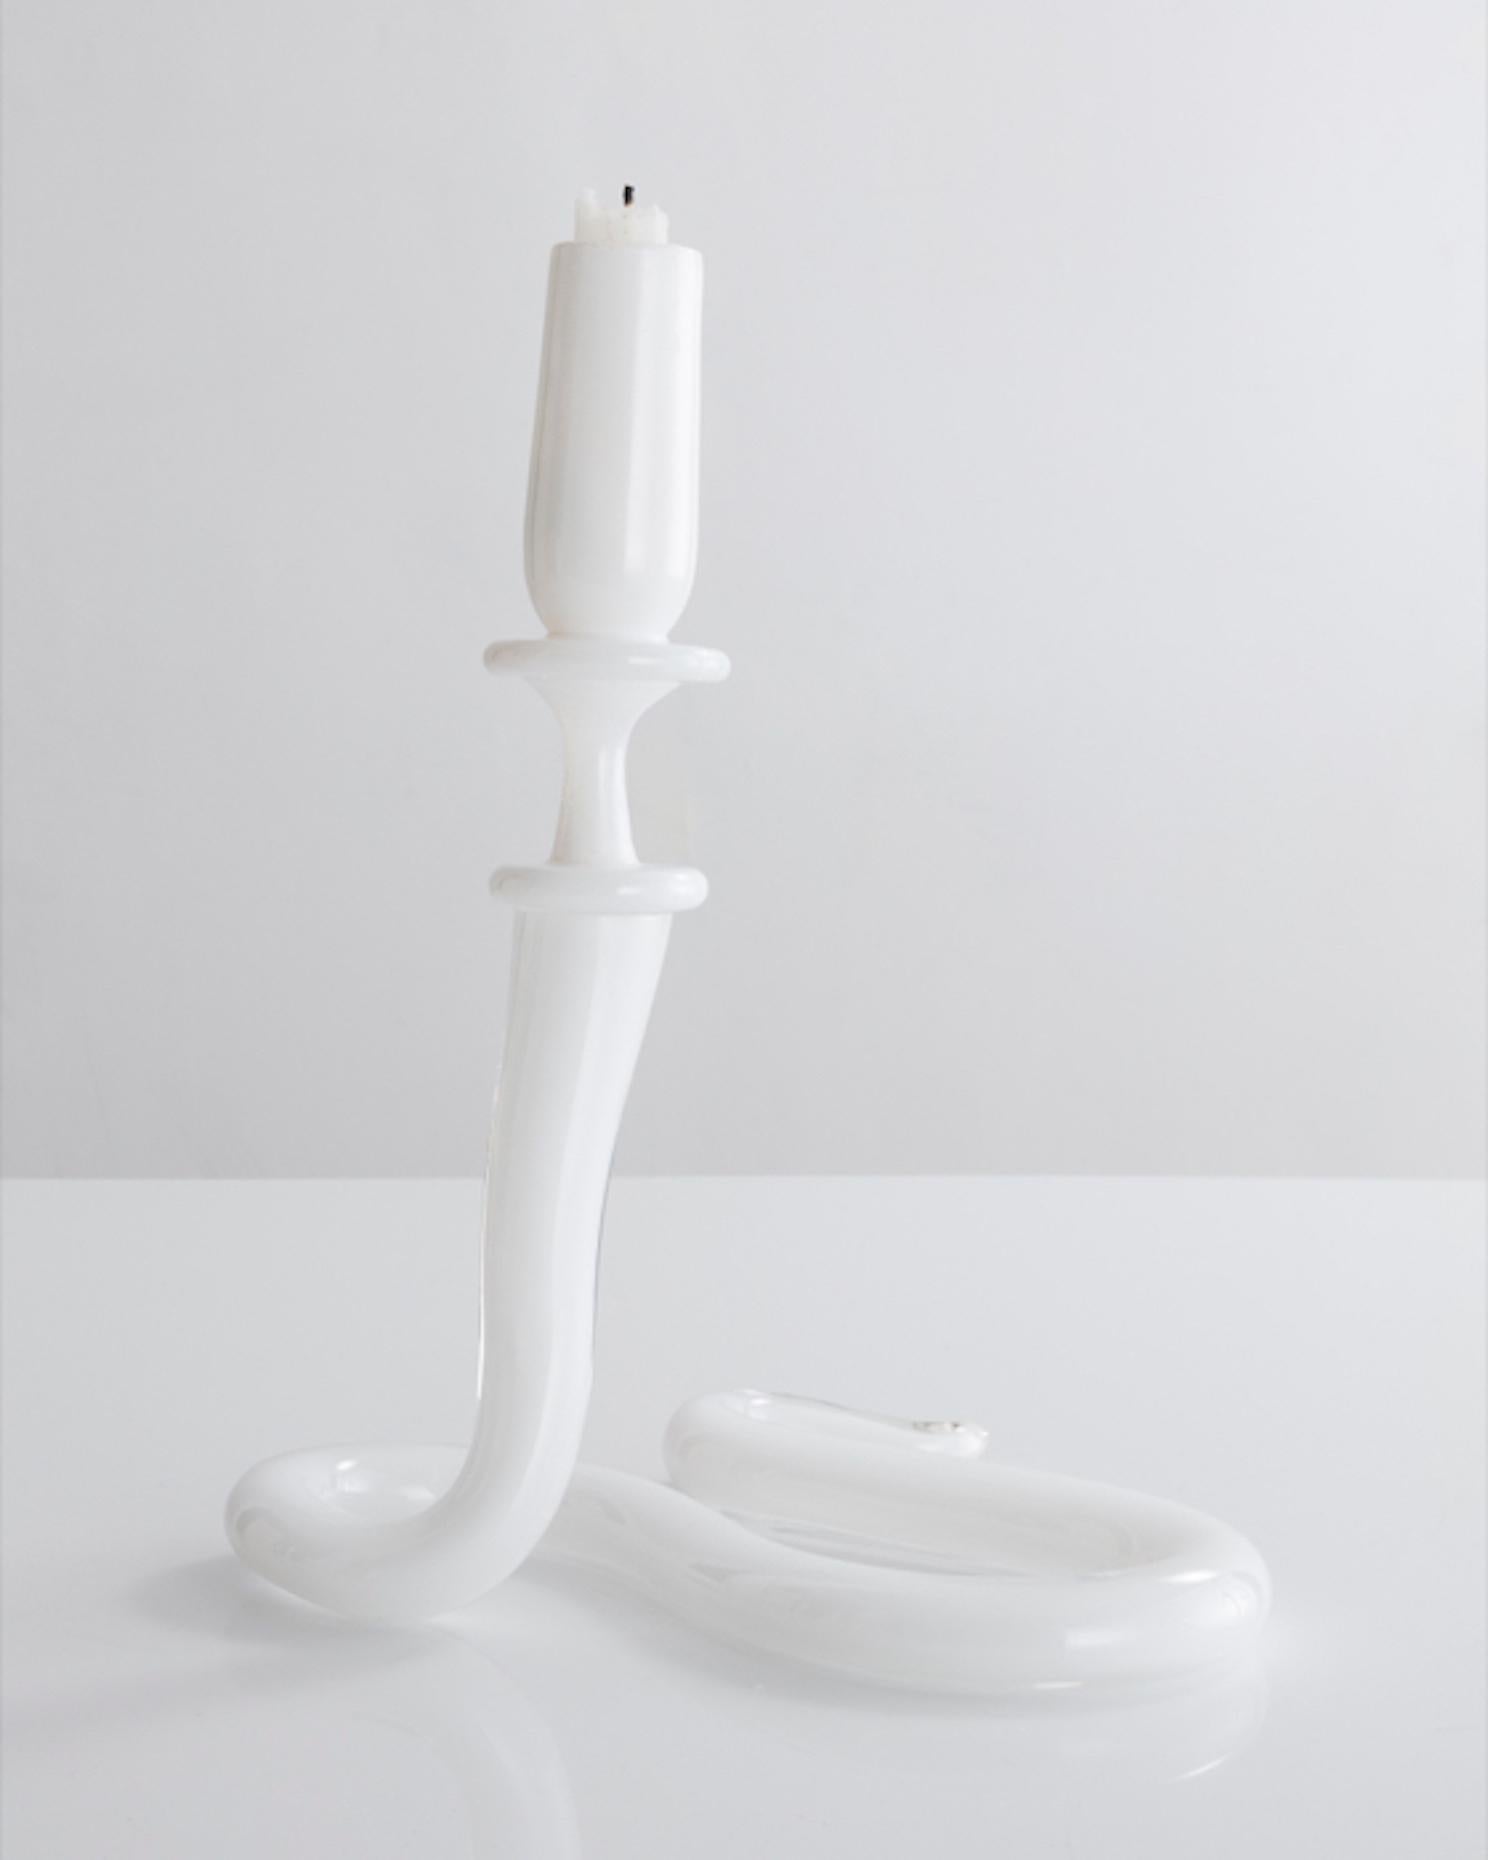 Unique single serpentine light sculpture in white hand-blown glass. Designed and made by Jeff Zimmerman, USA, 2017.